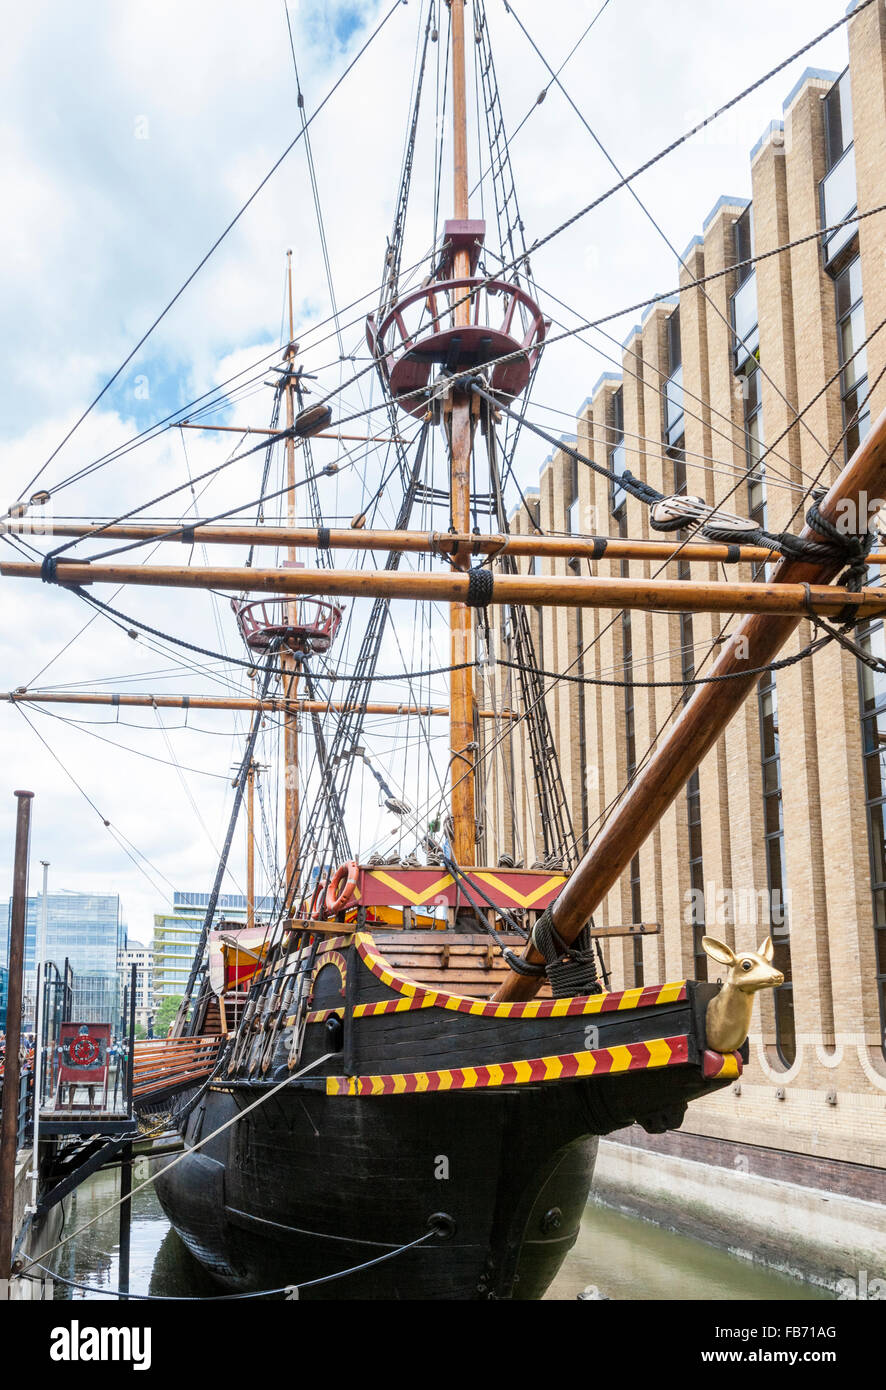 Golden Hinde (full size replica of the Golden Hind) docked in St Mary Overie Dock, London, England, UK Stock Photo